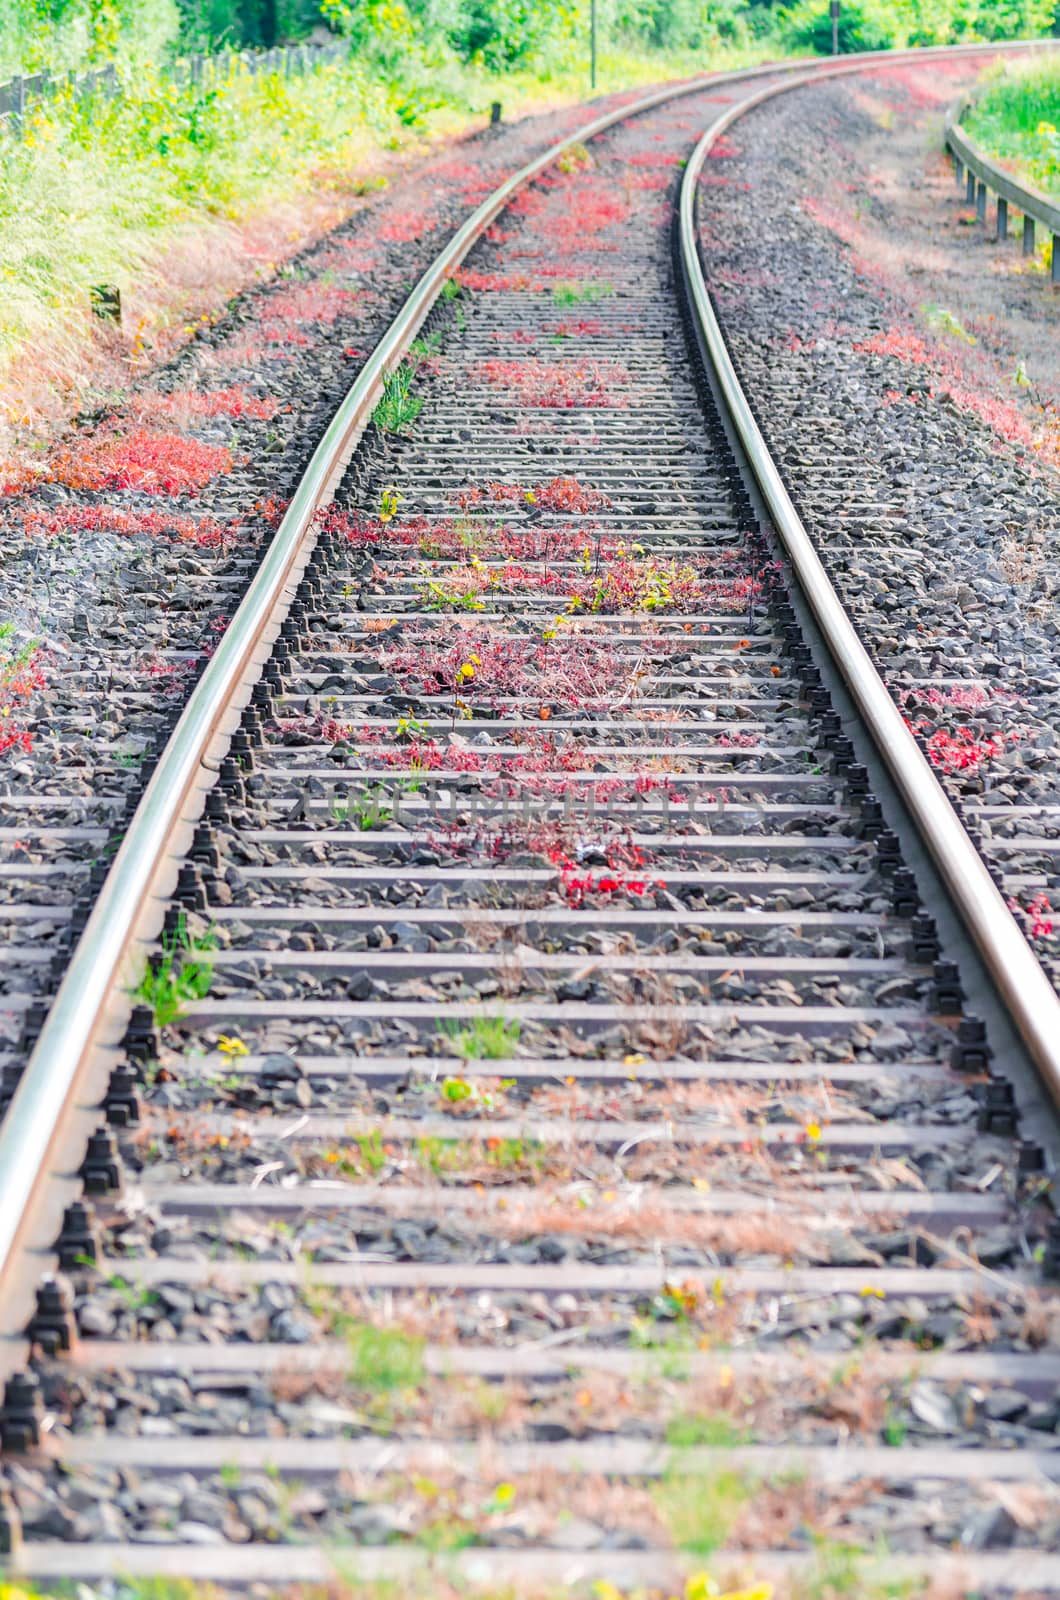 View on railroad tracks, track with a colorful plantings.
